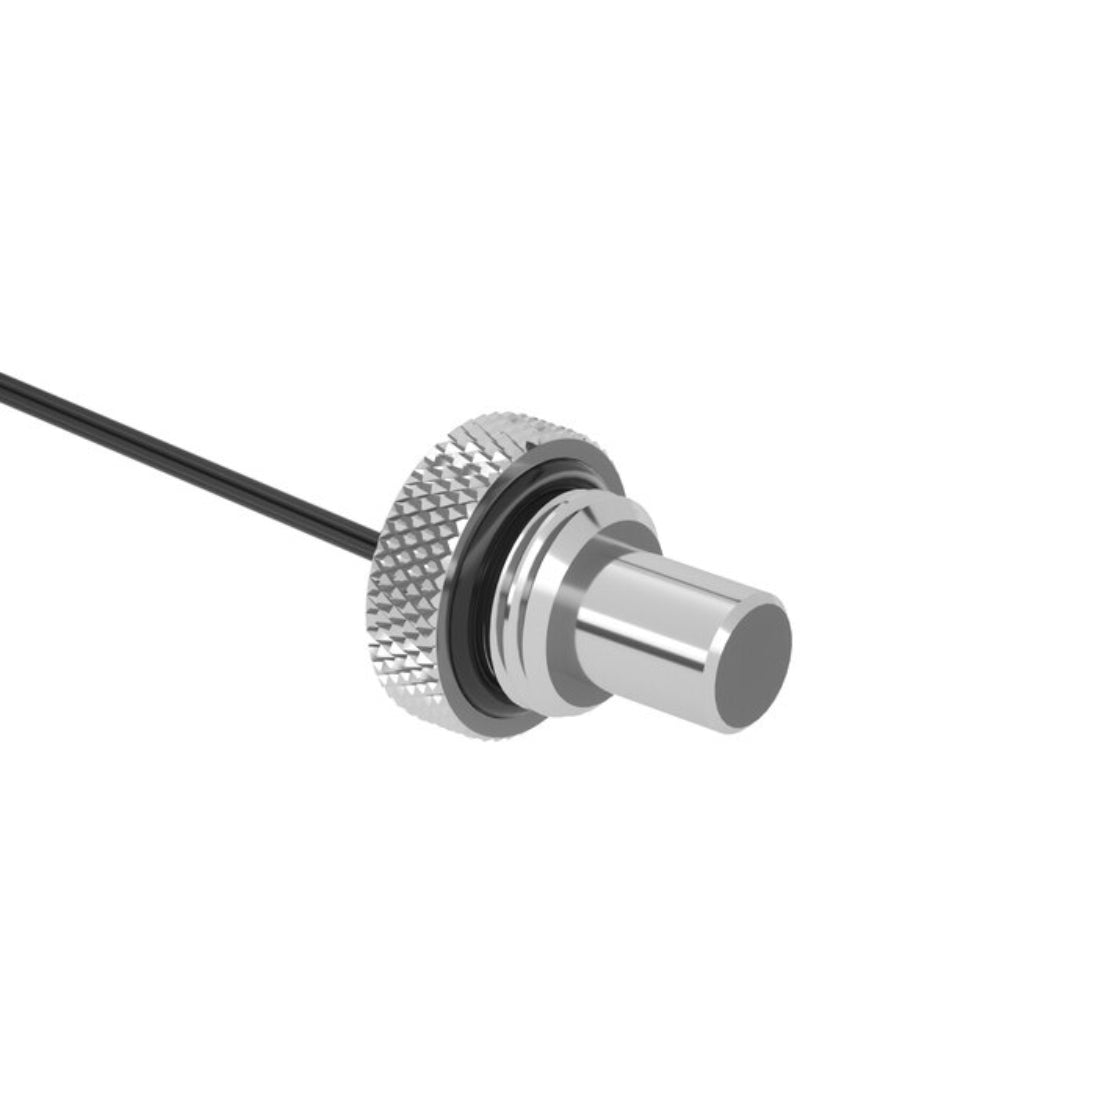 Barrowch G1/4 10K Temperature Sensor Lengthened Stop Fitting - Silver - Store 974 | ستور ٩٧٤